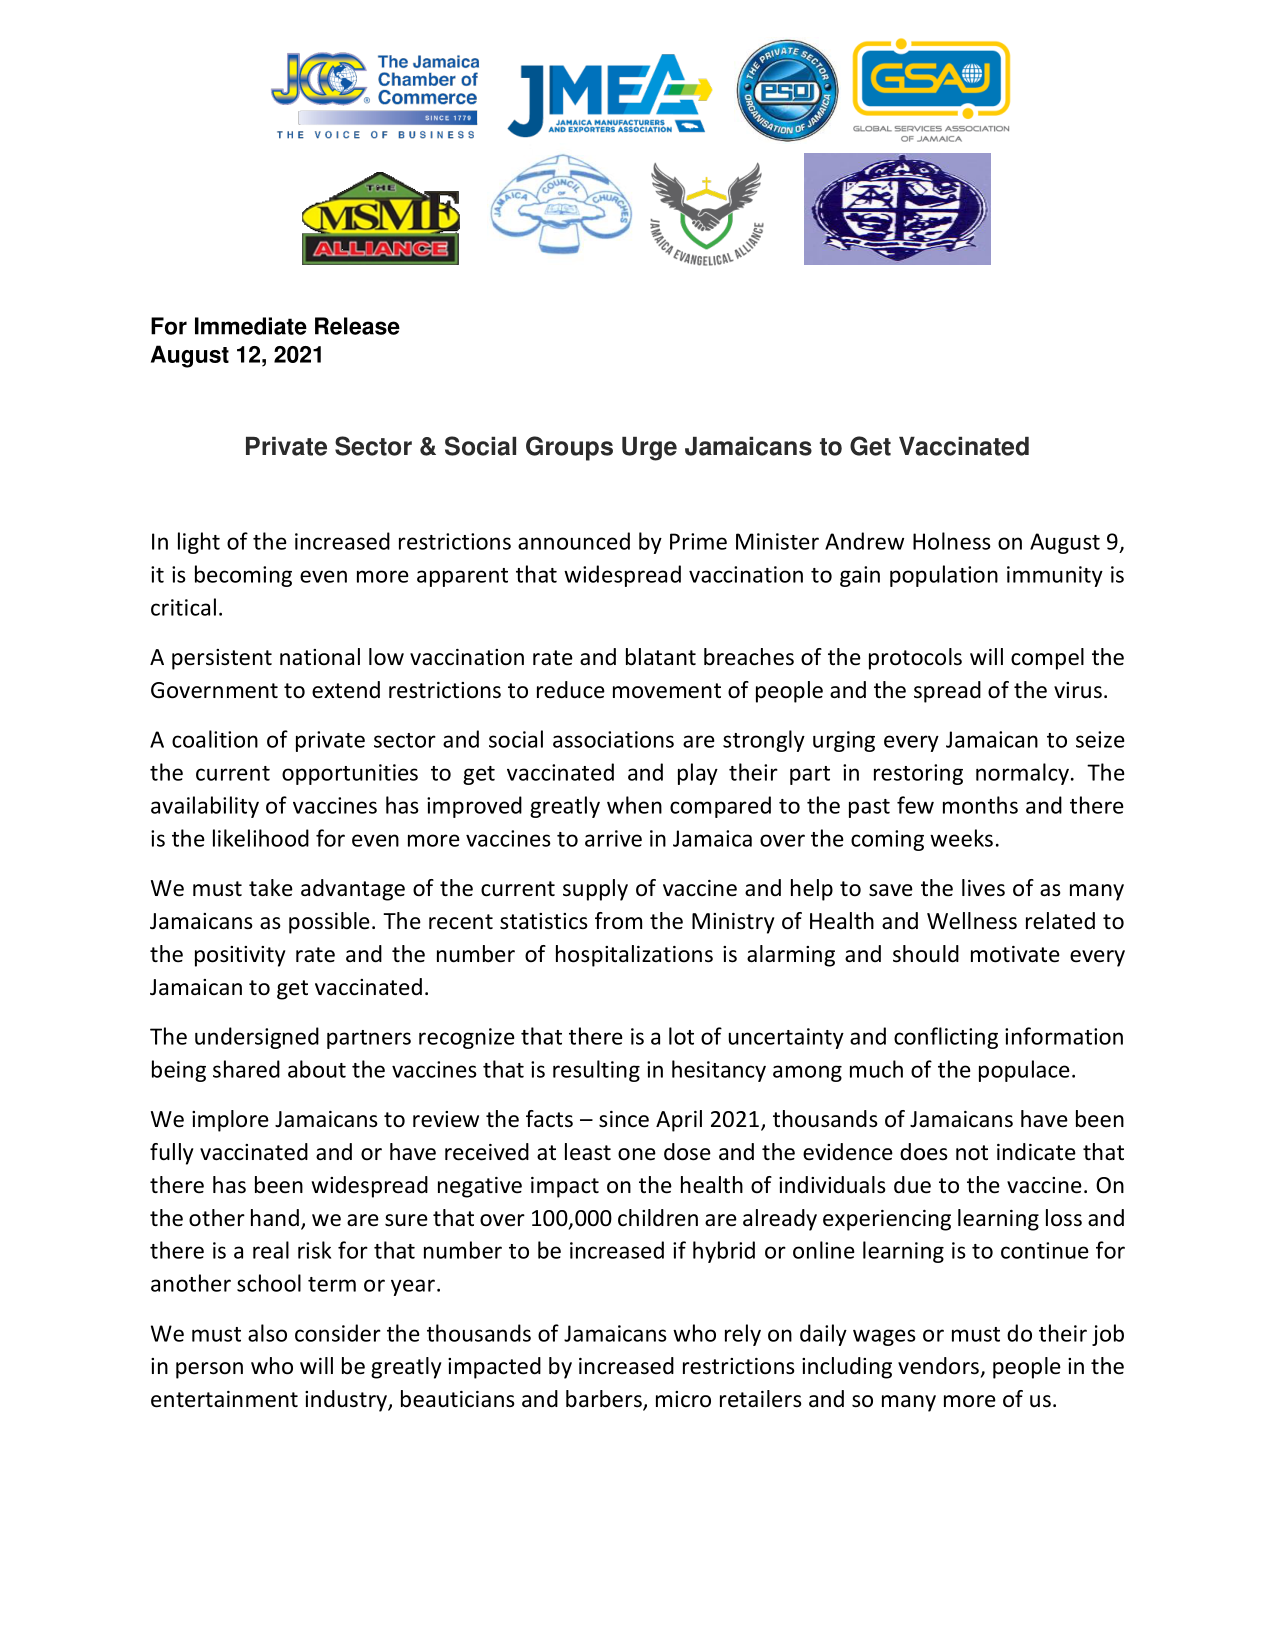 PRIVATE SECTOR AND SOCIAL GROUPS URGE JAMAICANS TO GET VACCINATED.png